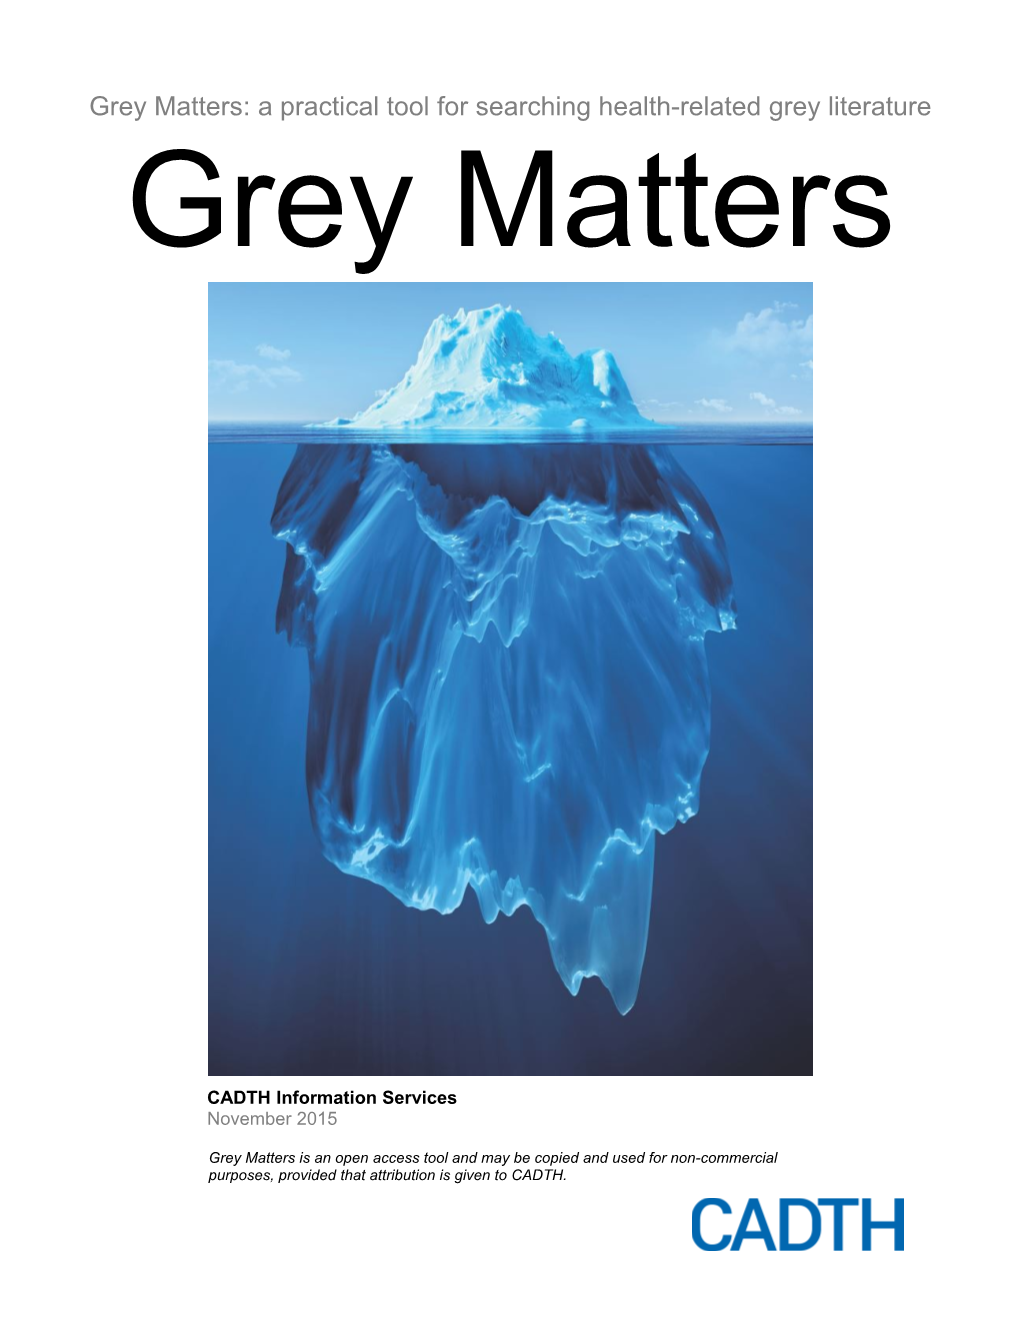 Grey Matters: a Practical Tool for Searching Health-Related Grey Literature